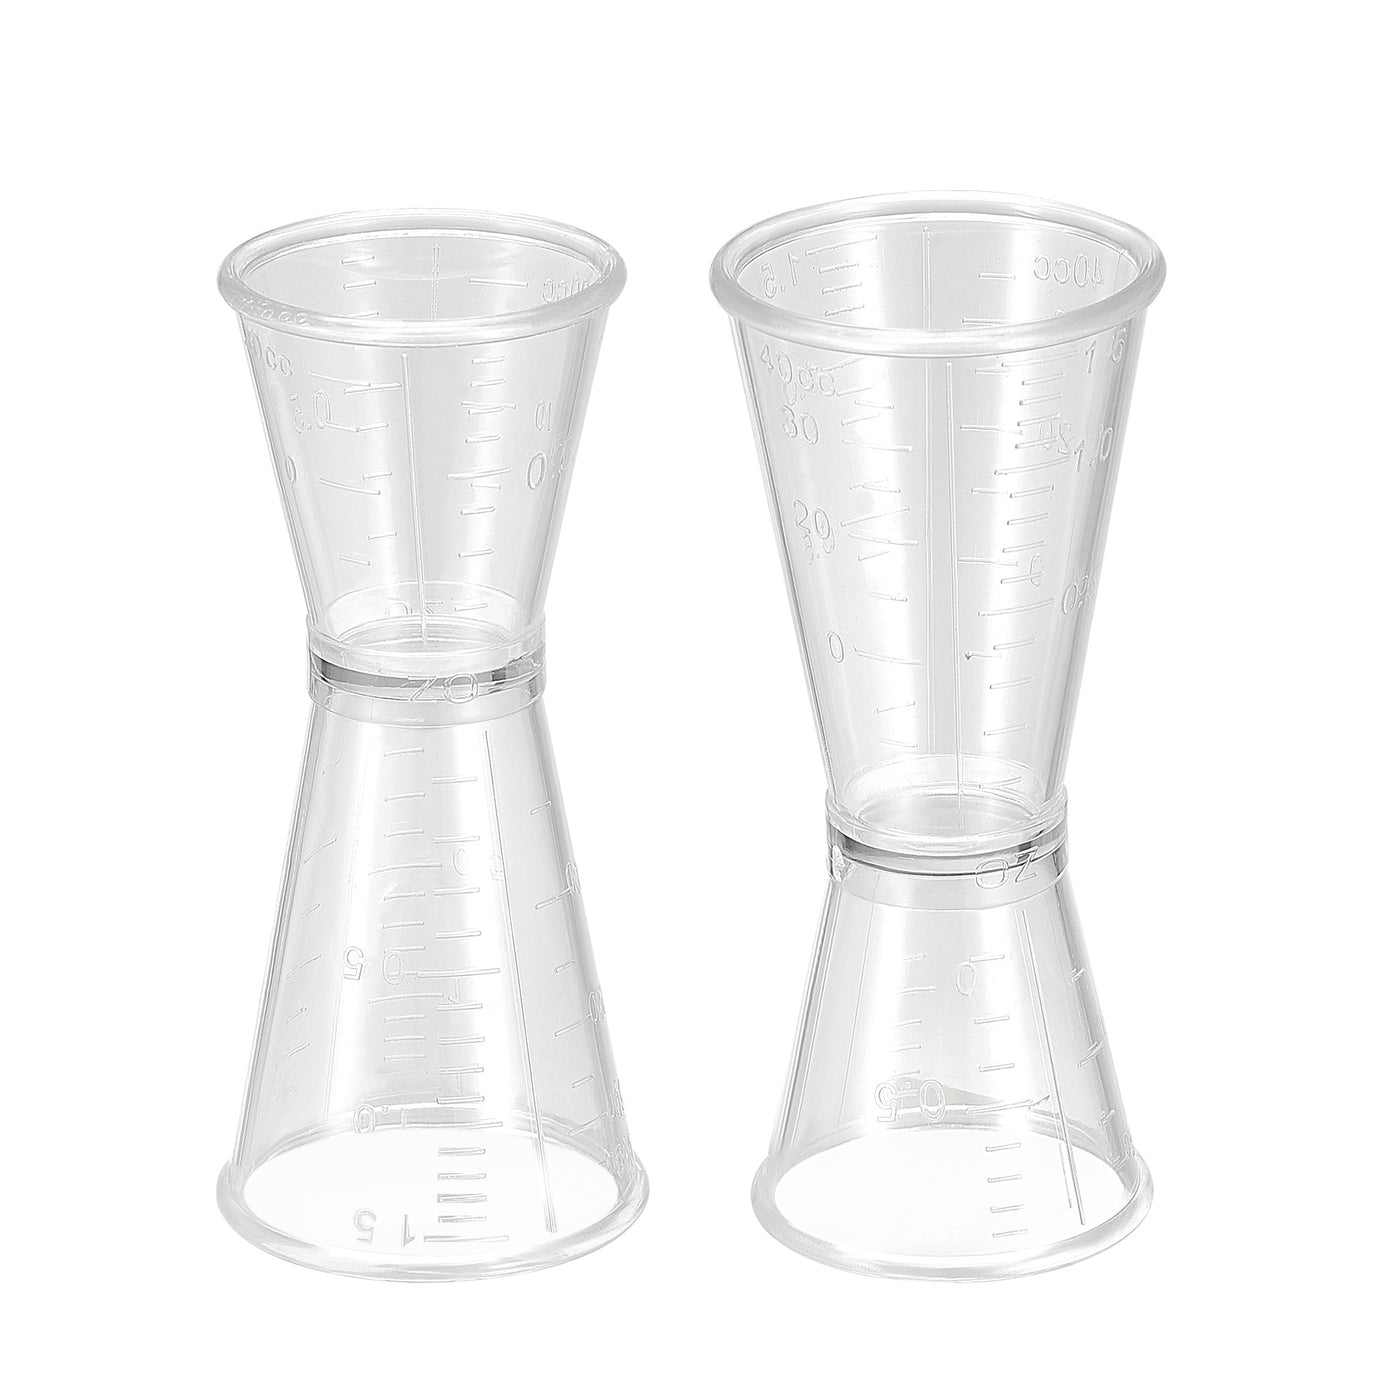 uxcell Uxcell Measuring Cup 40ml/20ml PC Plastic Double Head Beaker Clear 3Pcs